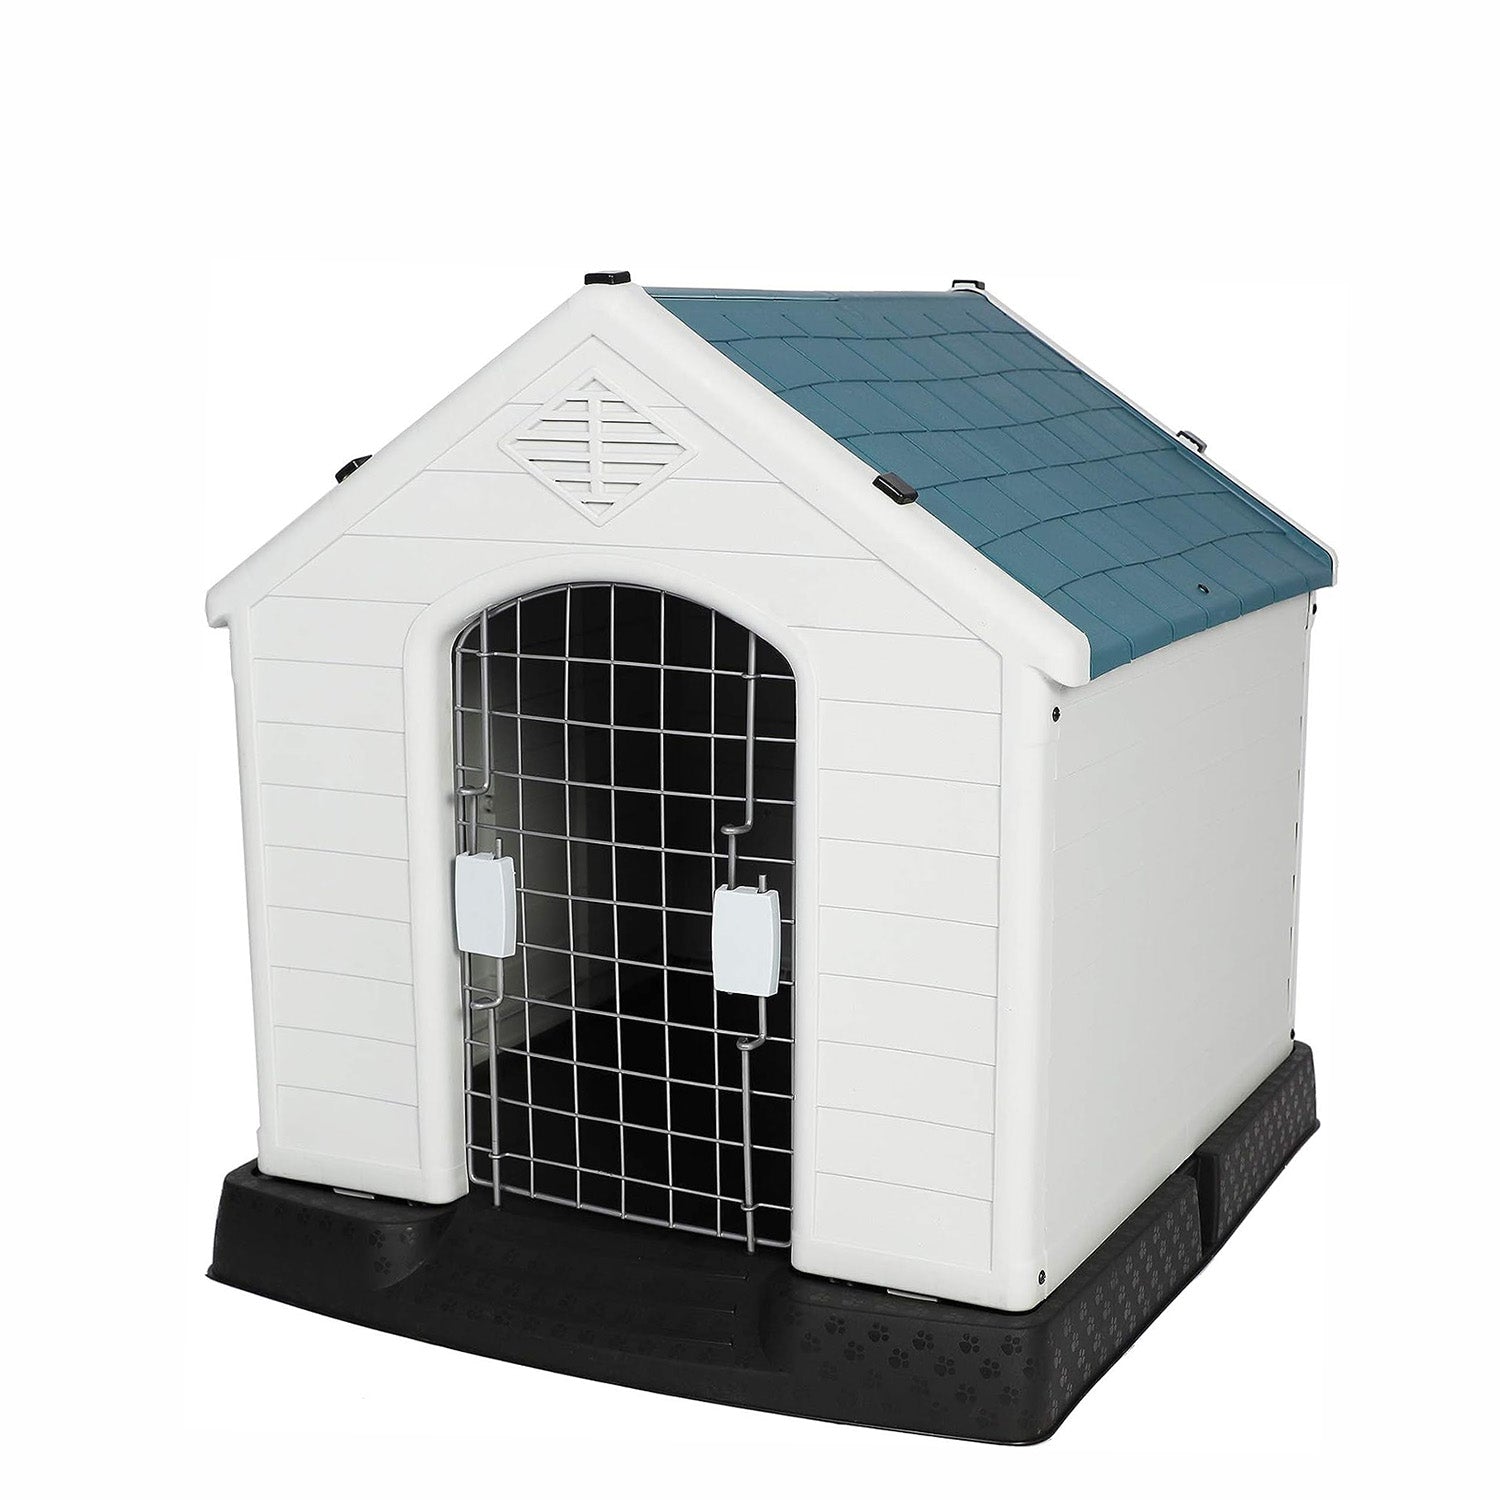 Small Outdoor Dog House Plastic Waterproof Kennel, 26.5"L x 25"W x 28"H